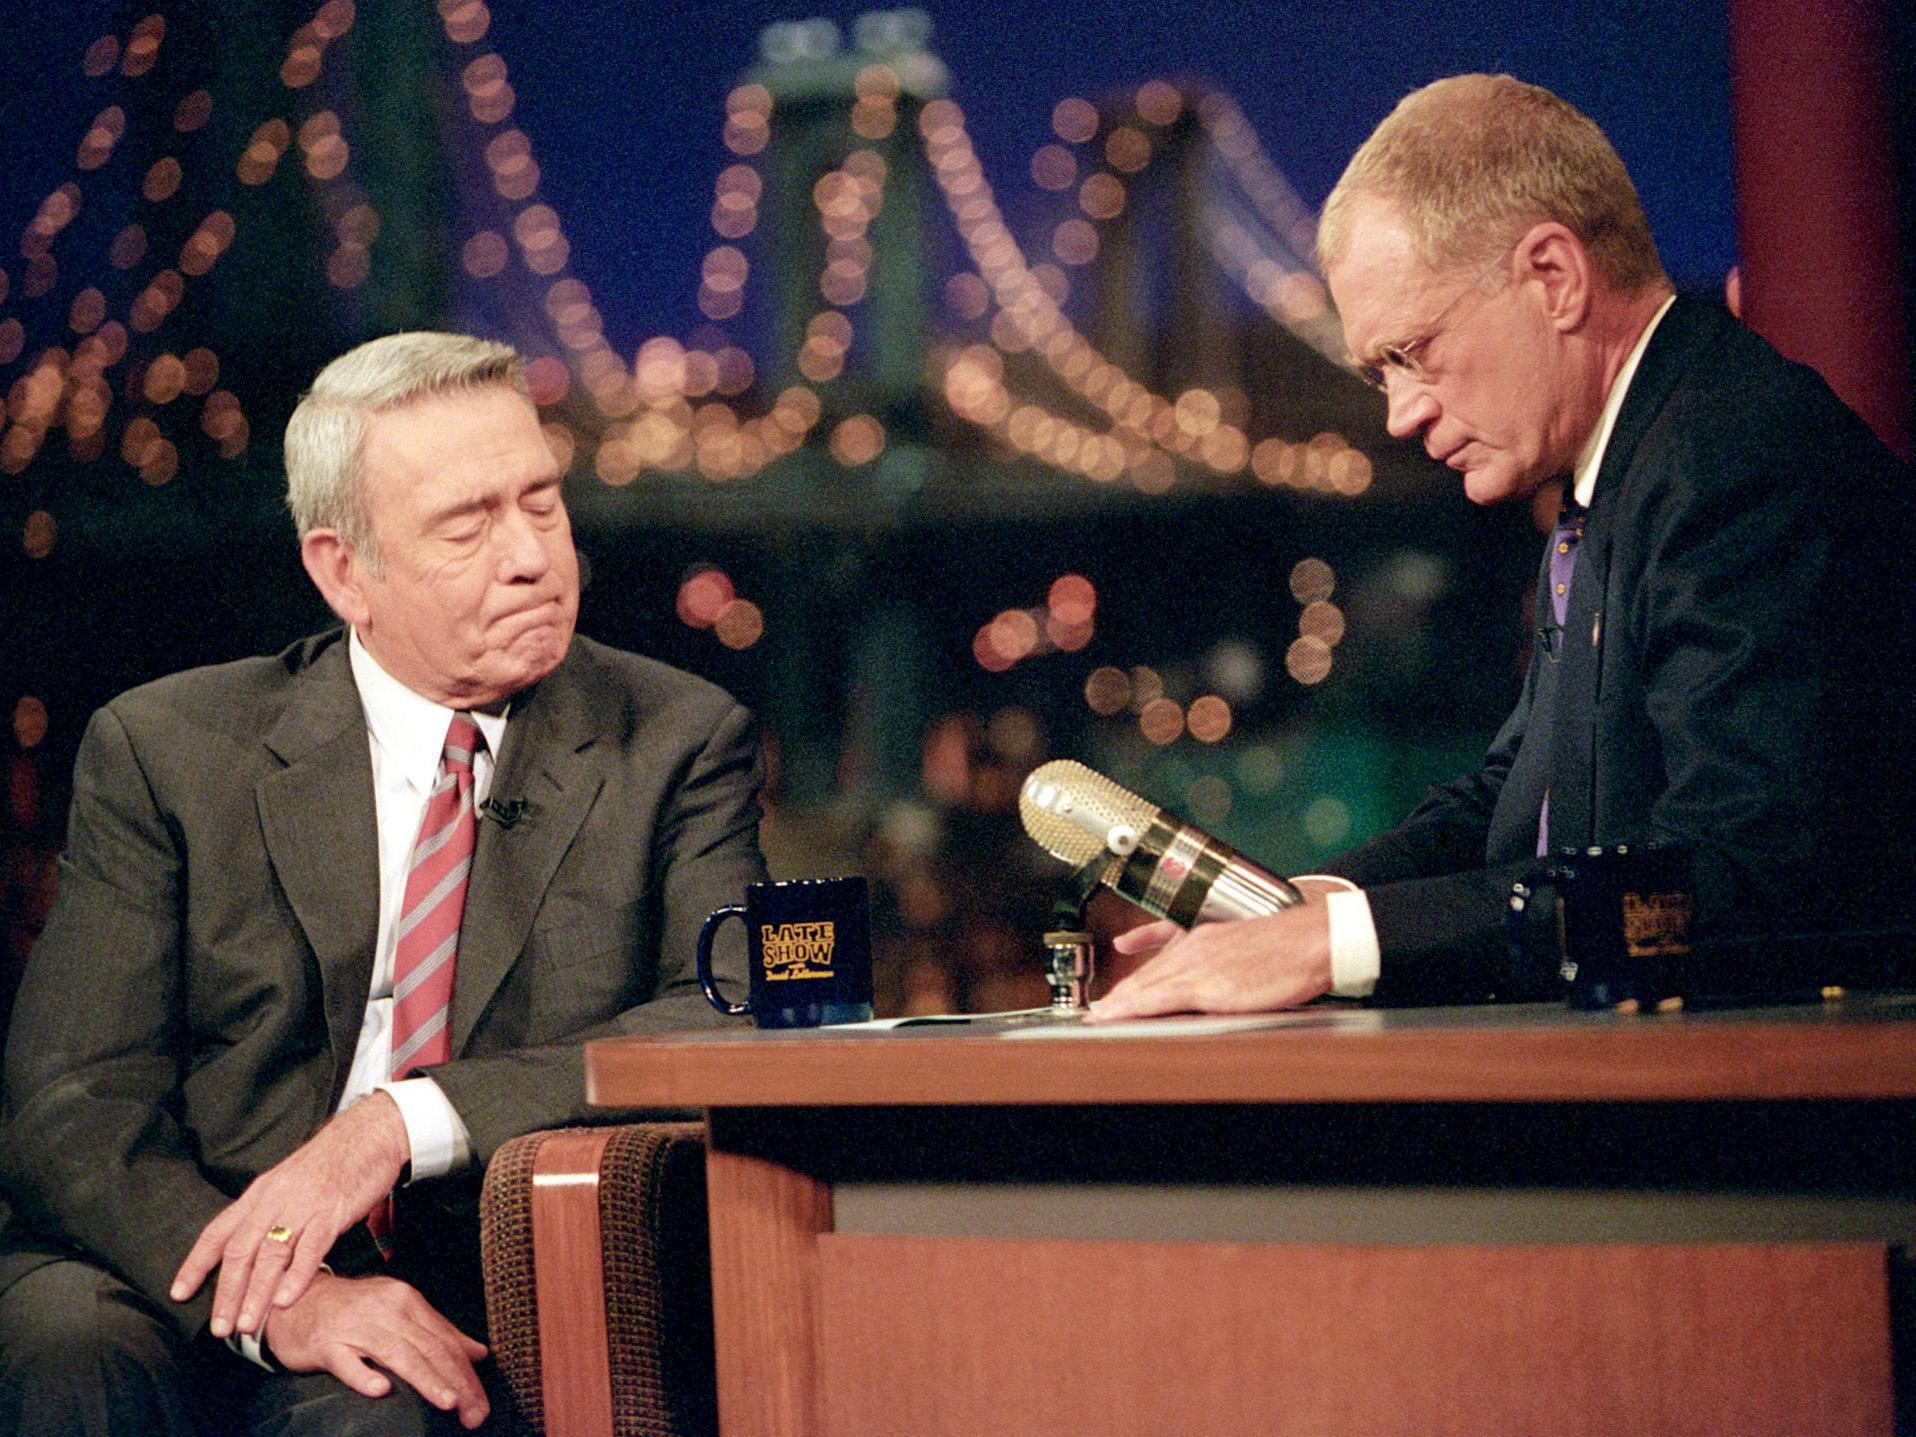 Dan Rather is comforted by host David Letterman on 17 September 2001 after Rather was overcome by emotion while discussing the World Trade Center and Pentagon attacks in a famous moment from his broadcasting career